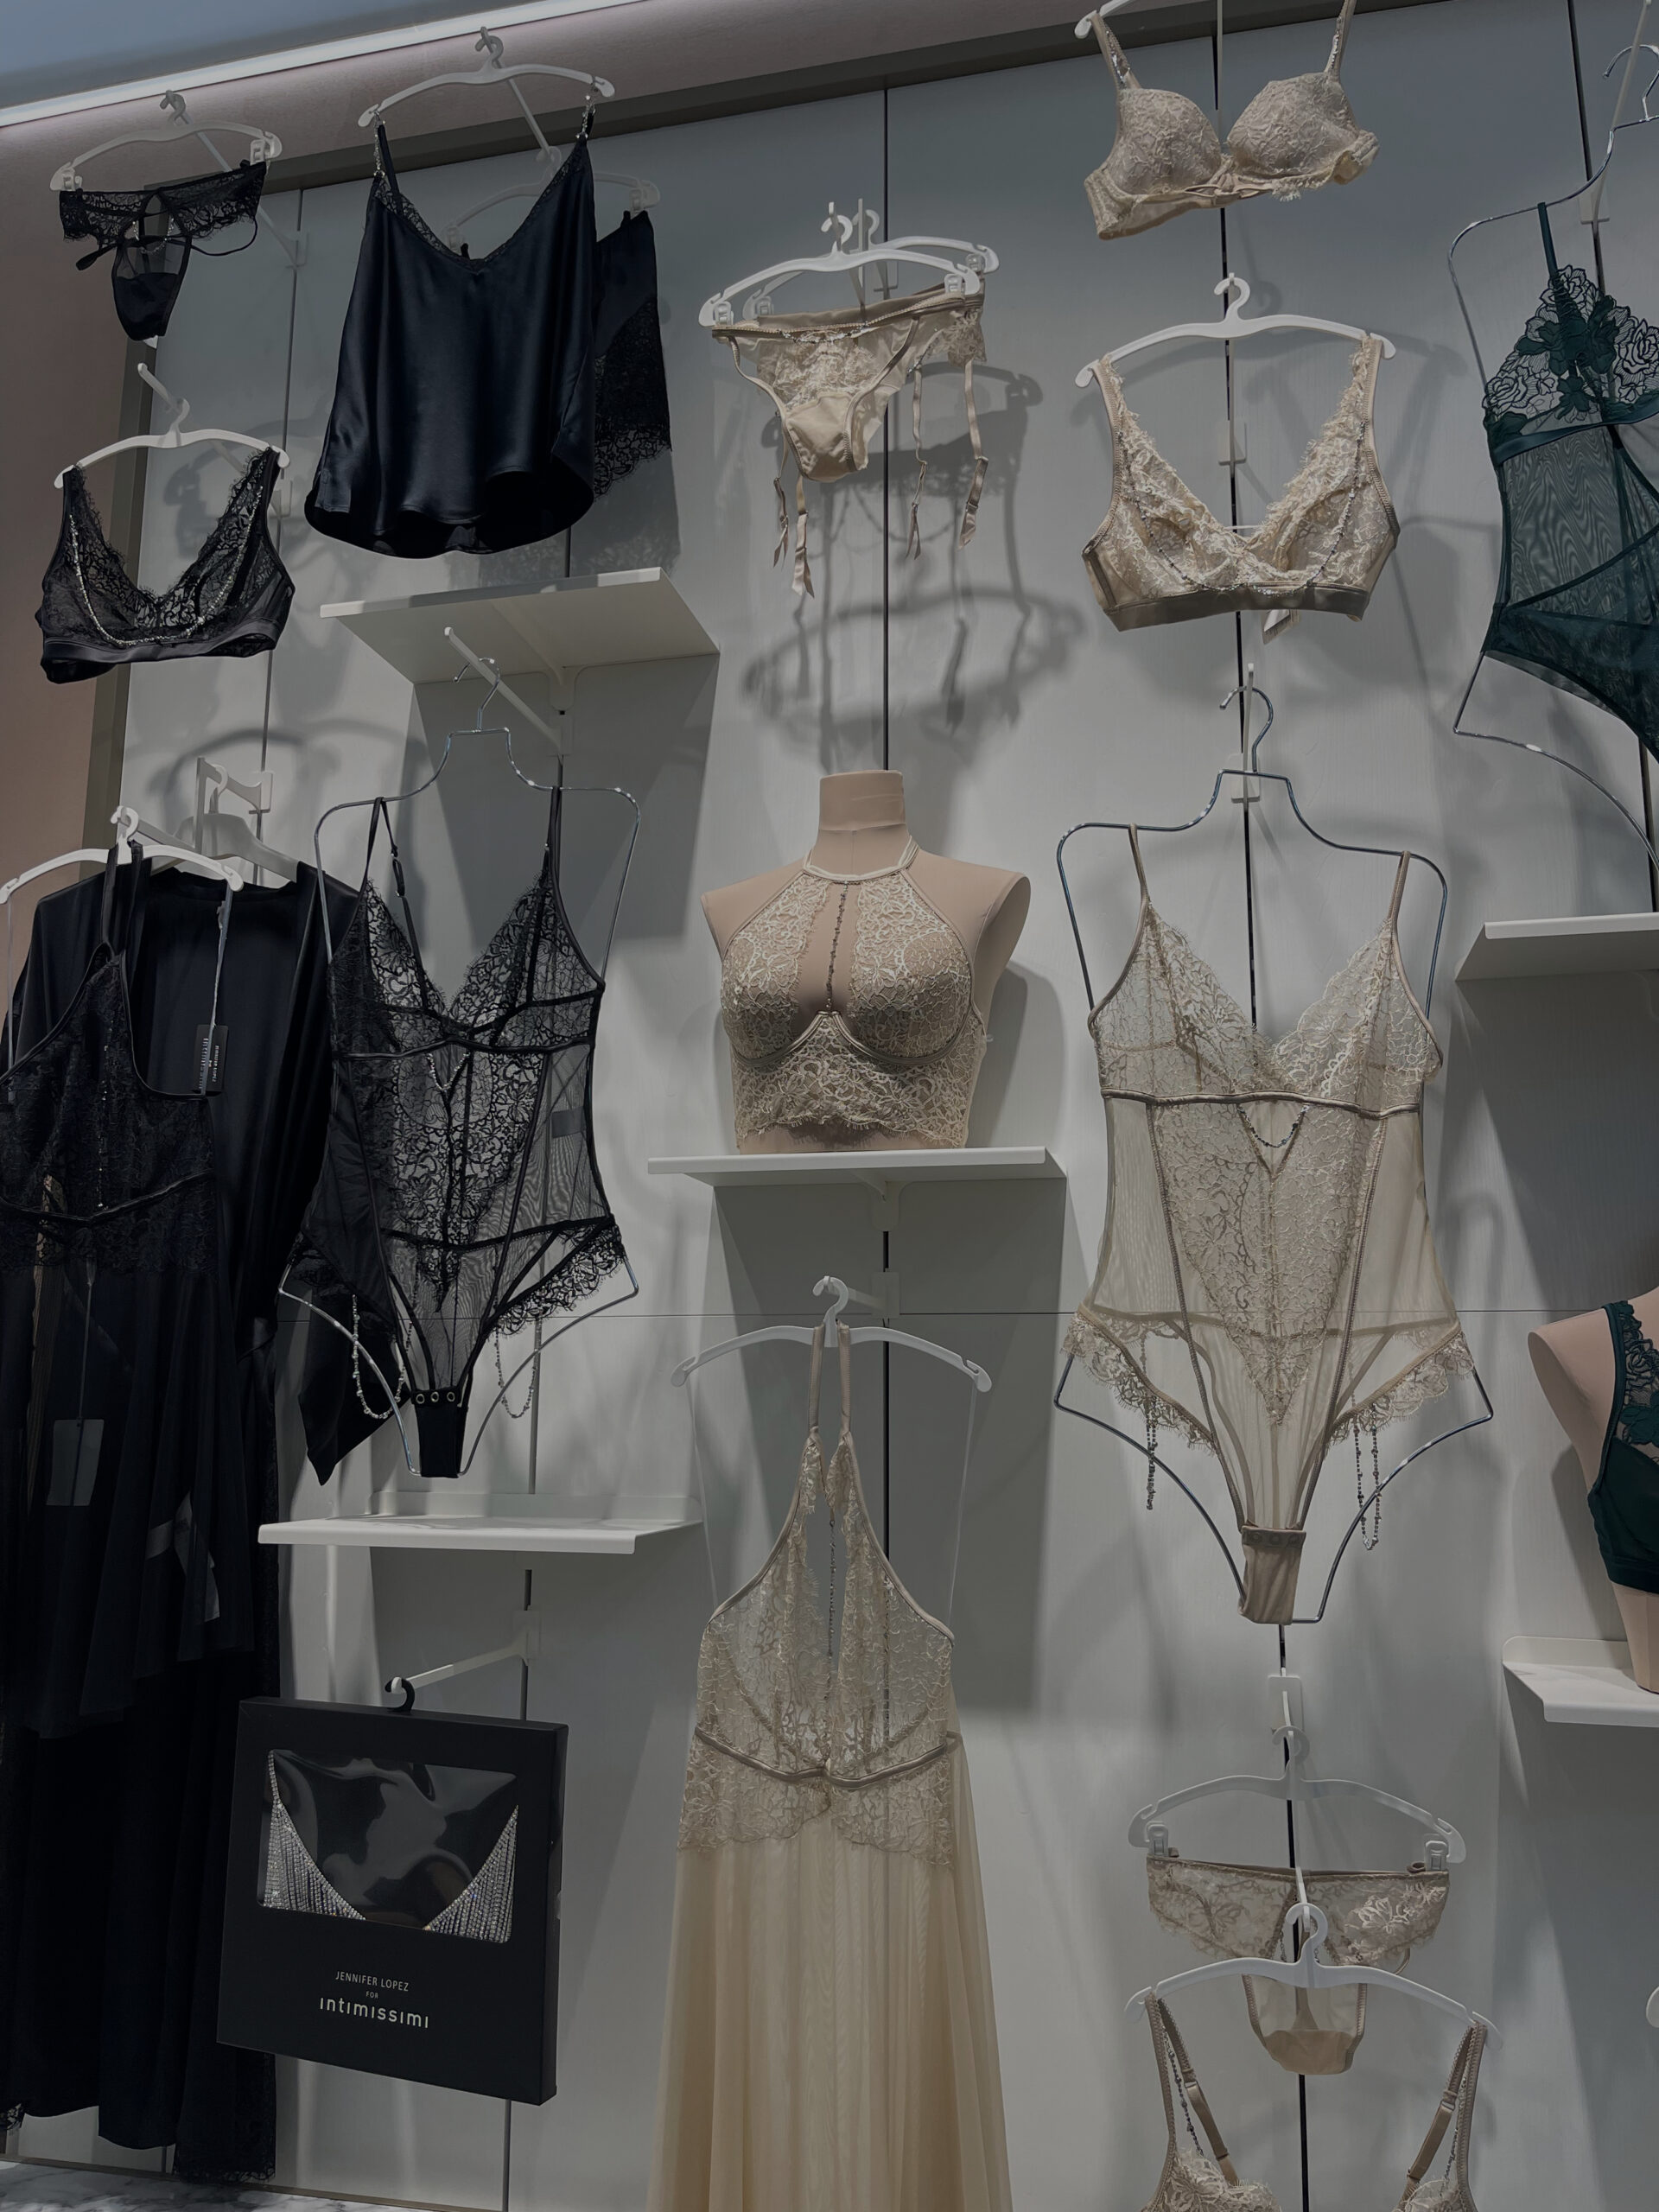 Underwear and lingerie store in NEW YORK CITY at 97 Fifth Avenue